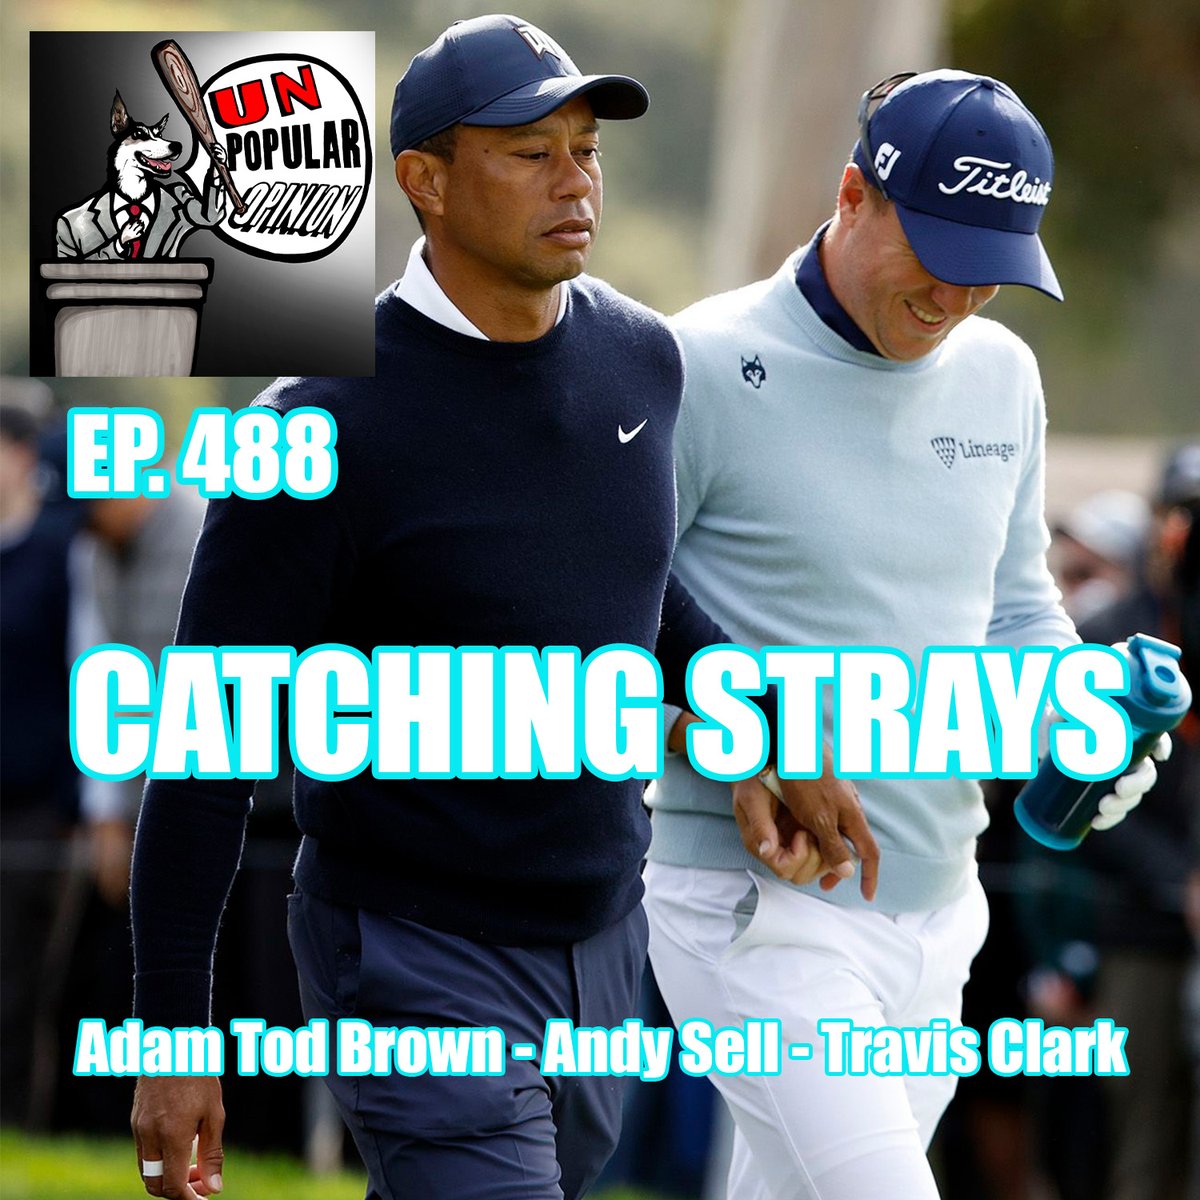 We are back! New @unpops up now! @adamtodbrown @trackrivals and @andy_sell talk Tiger Woods, Nikki Haley, Don Lemon, and so much more! Get it at anchor.fm/unpops or all the other places!